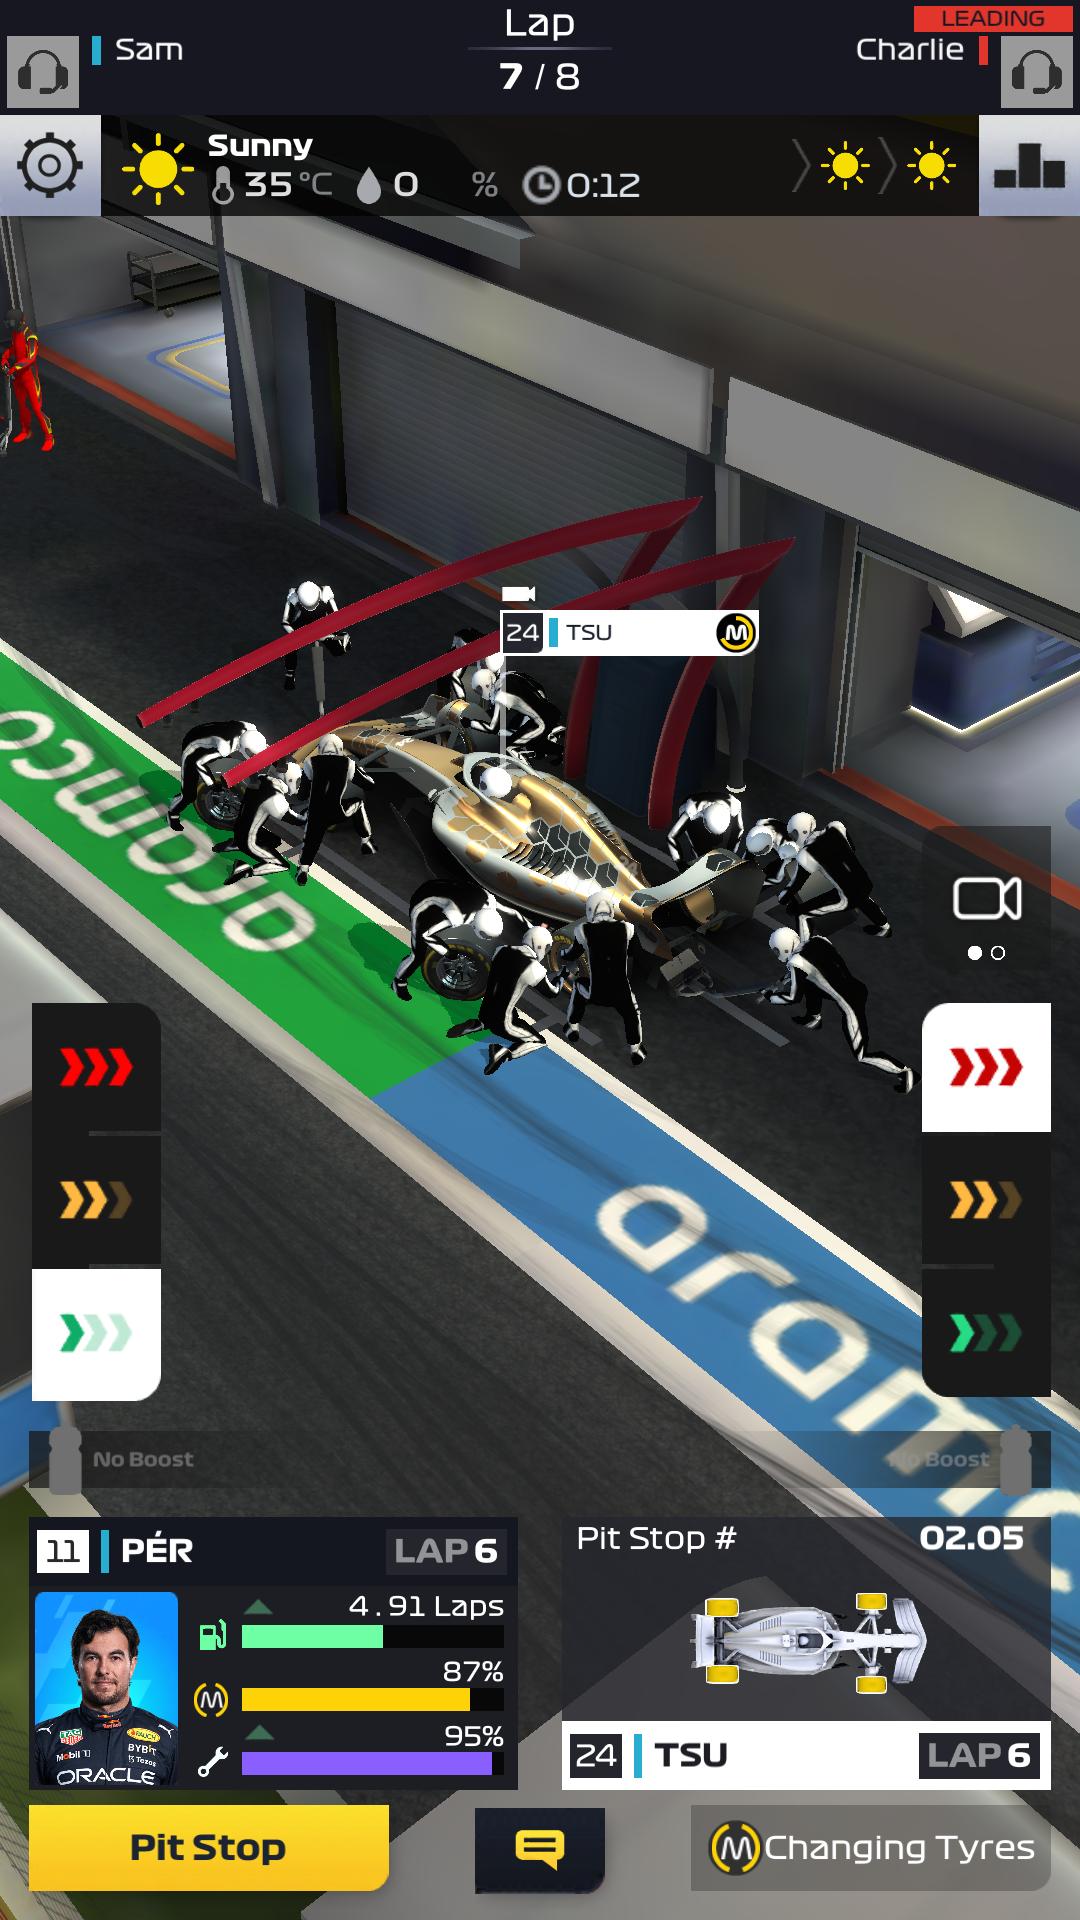 Hot lap league. F1 Manager игры на андроид. F1 Clash. F1 Manager на андроид на ПК. Motorsport Manager Racing Android трассы.